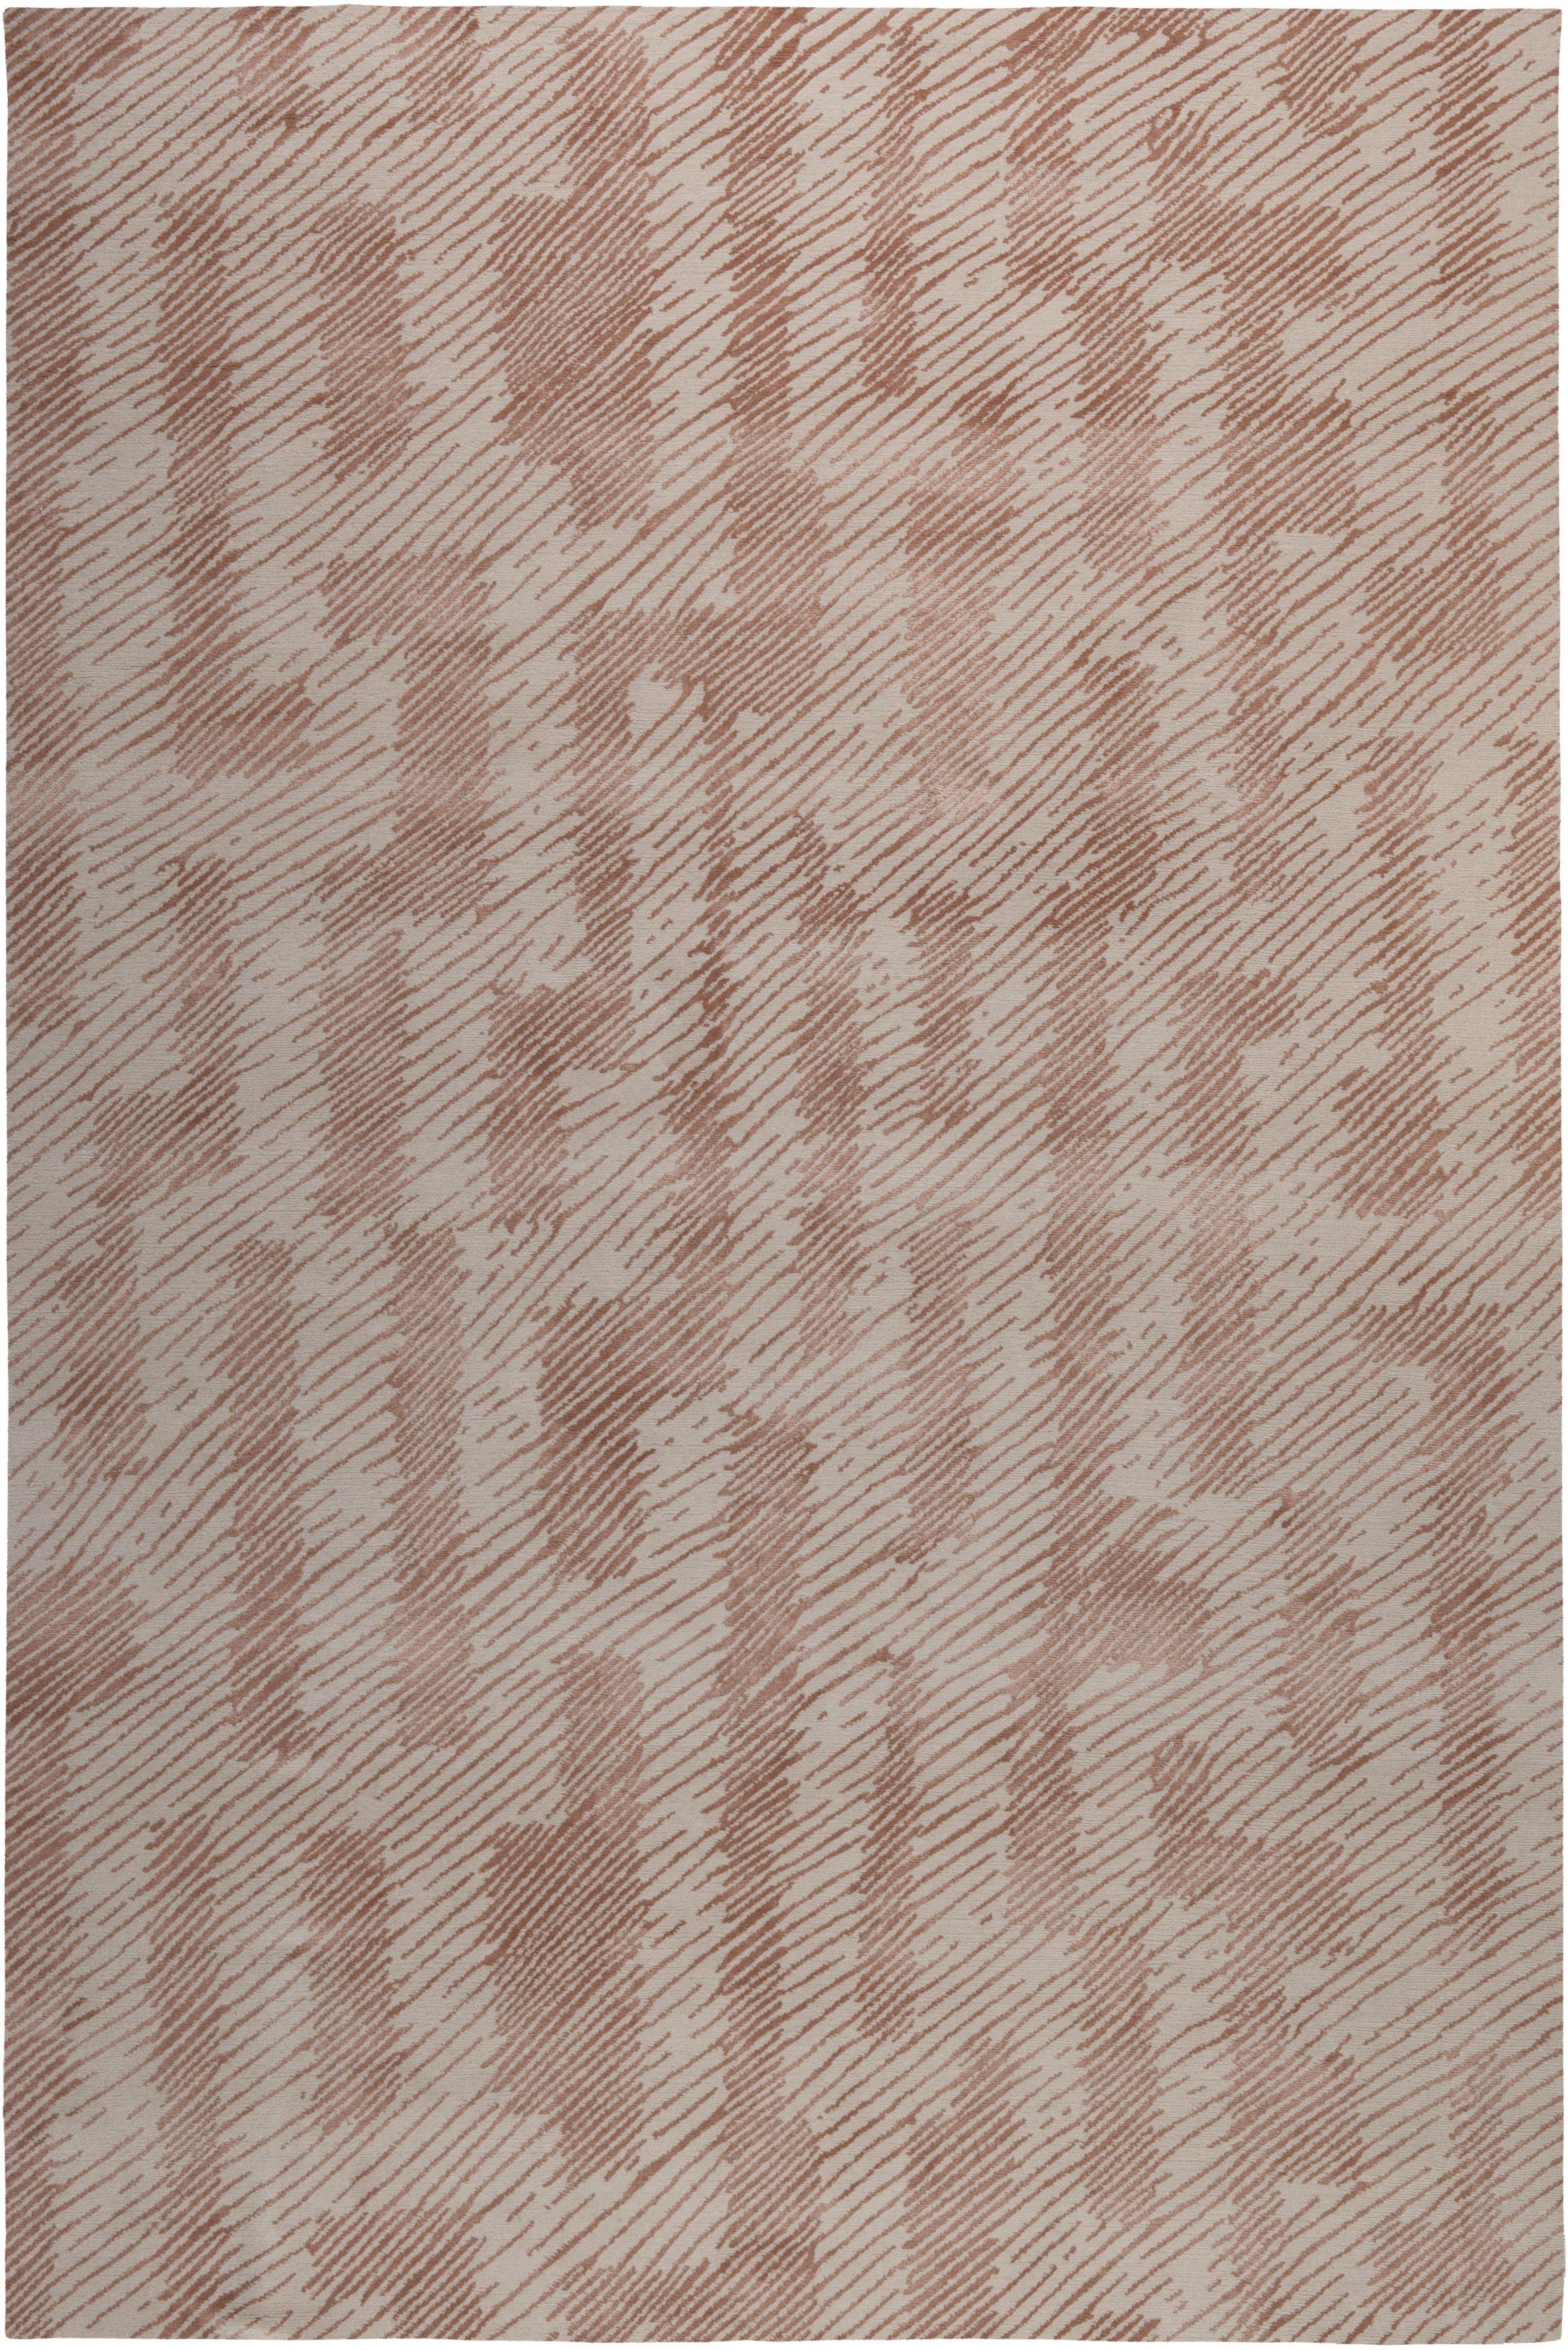 For Sale: Pink (Clay) Verge Rug in Hand Knotted Wool and Silk by Kelly Wearstler